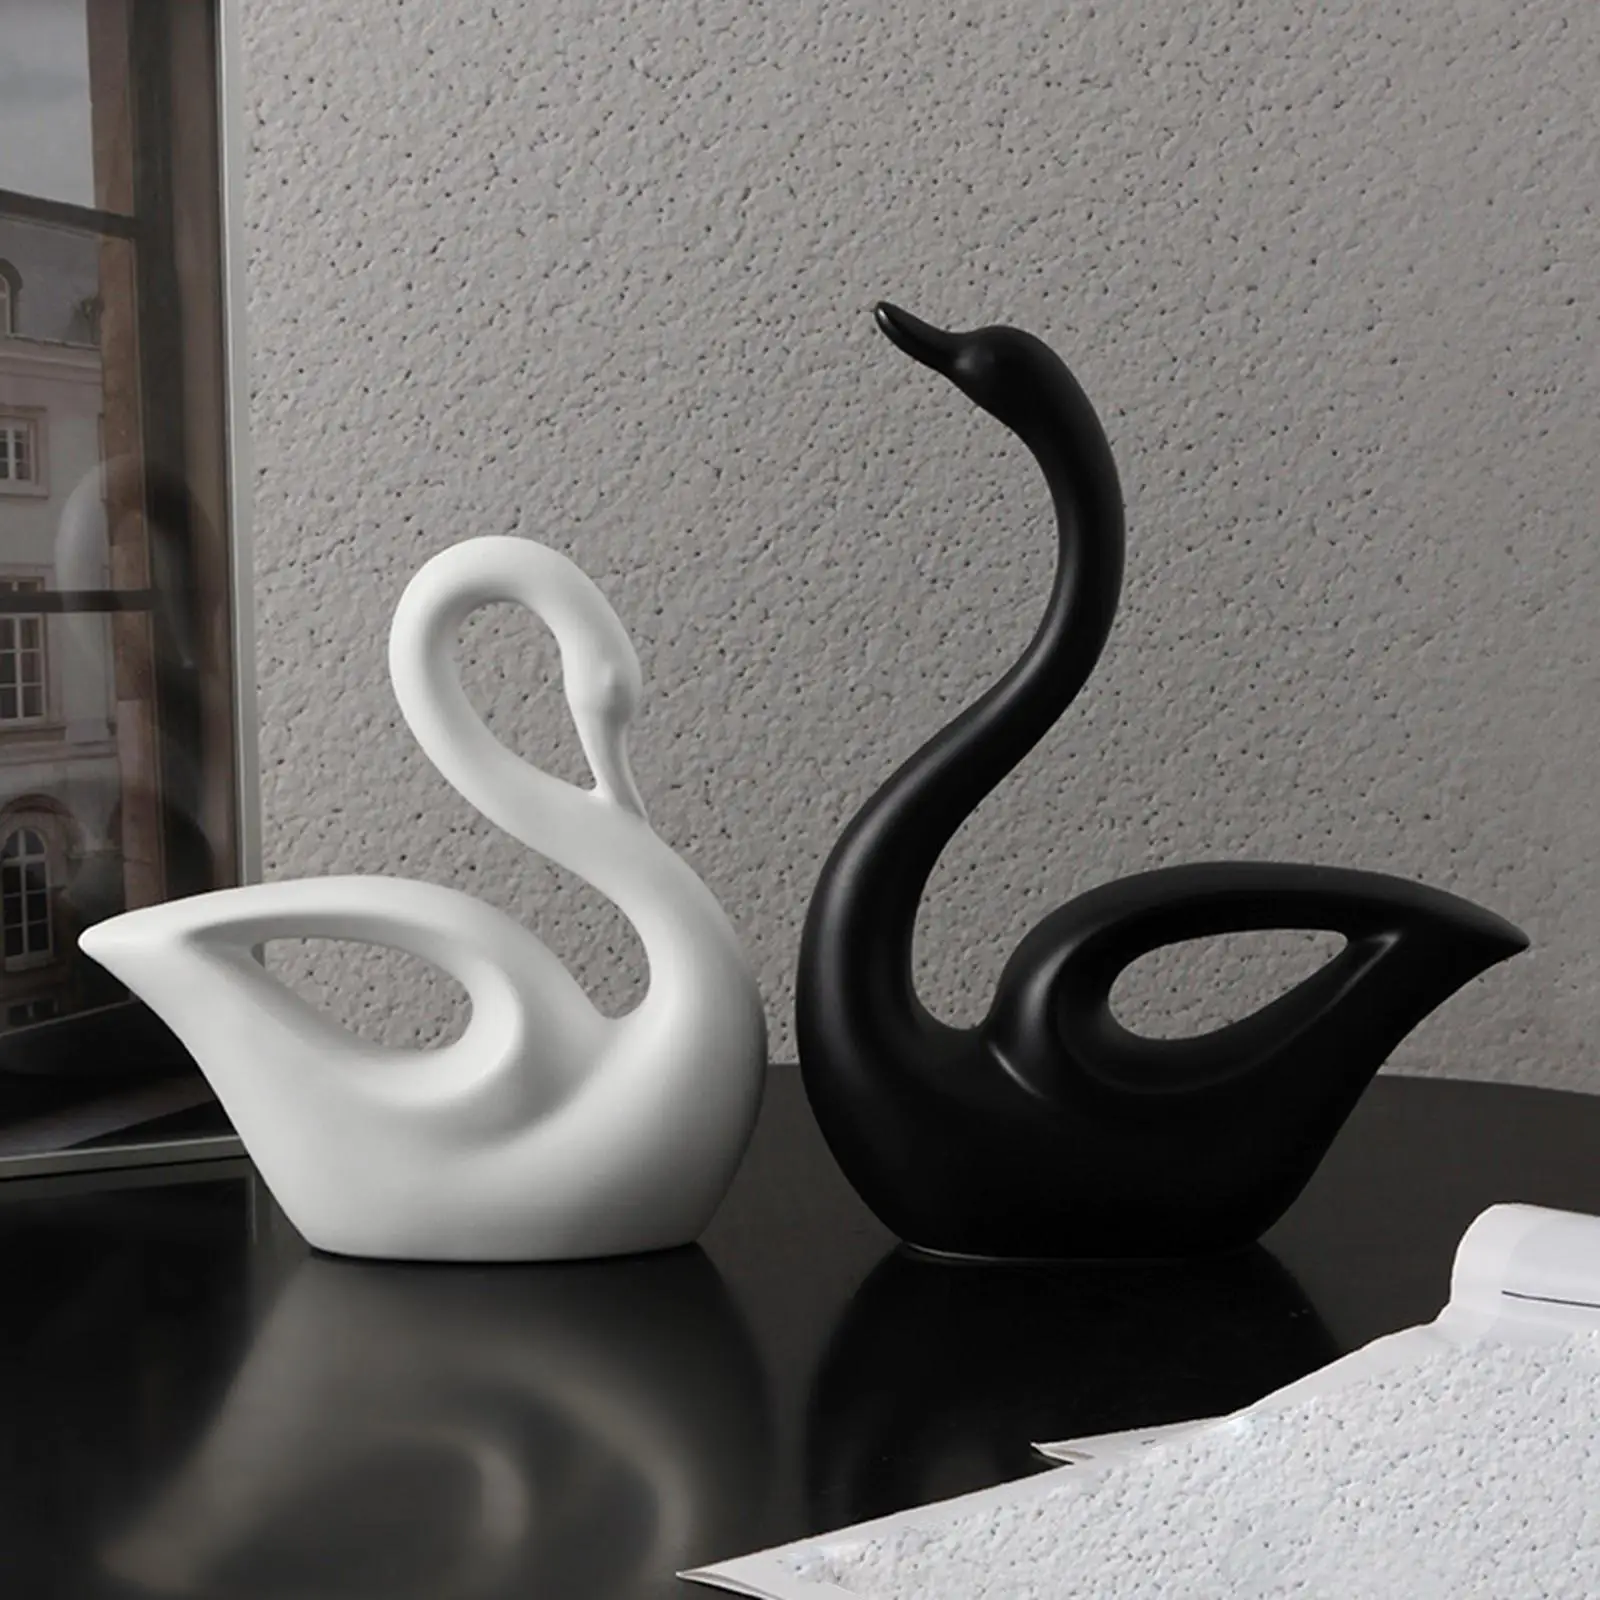 2x Nordic Couple Swans Figurines Statue for TV Cabinet Table Decoration